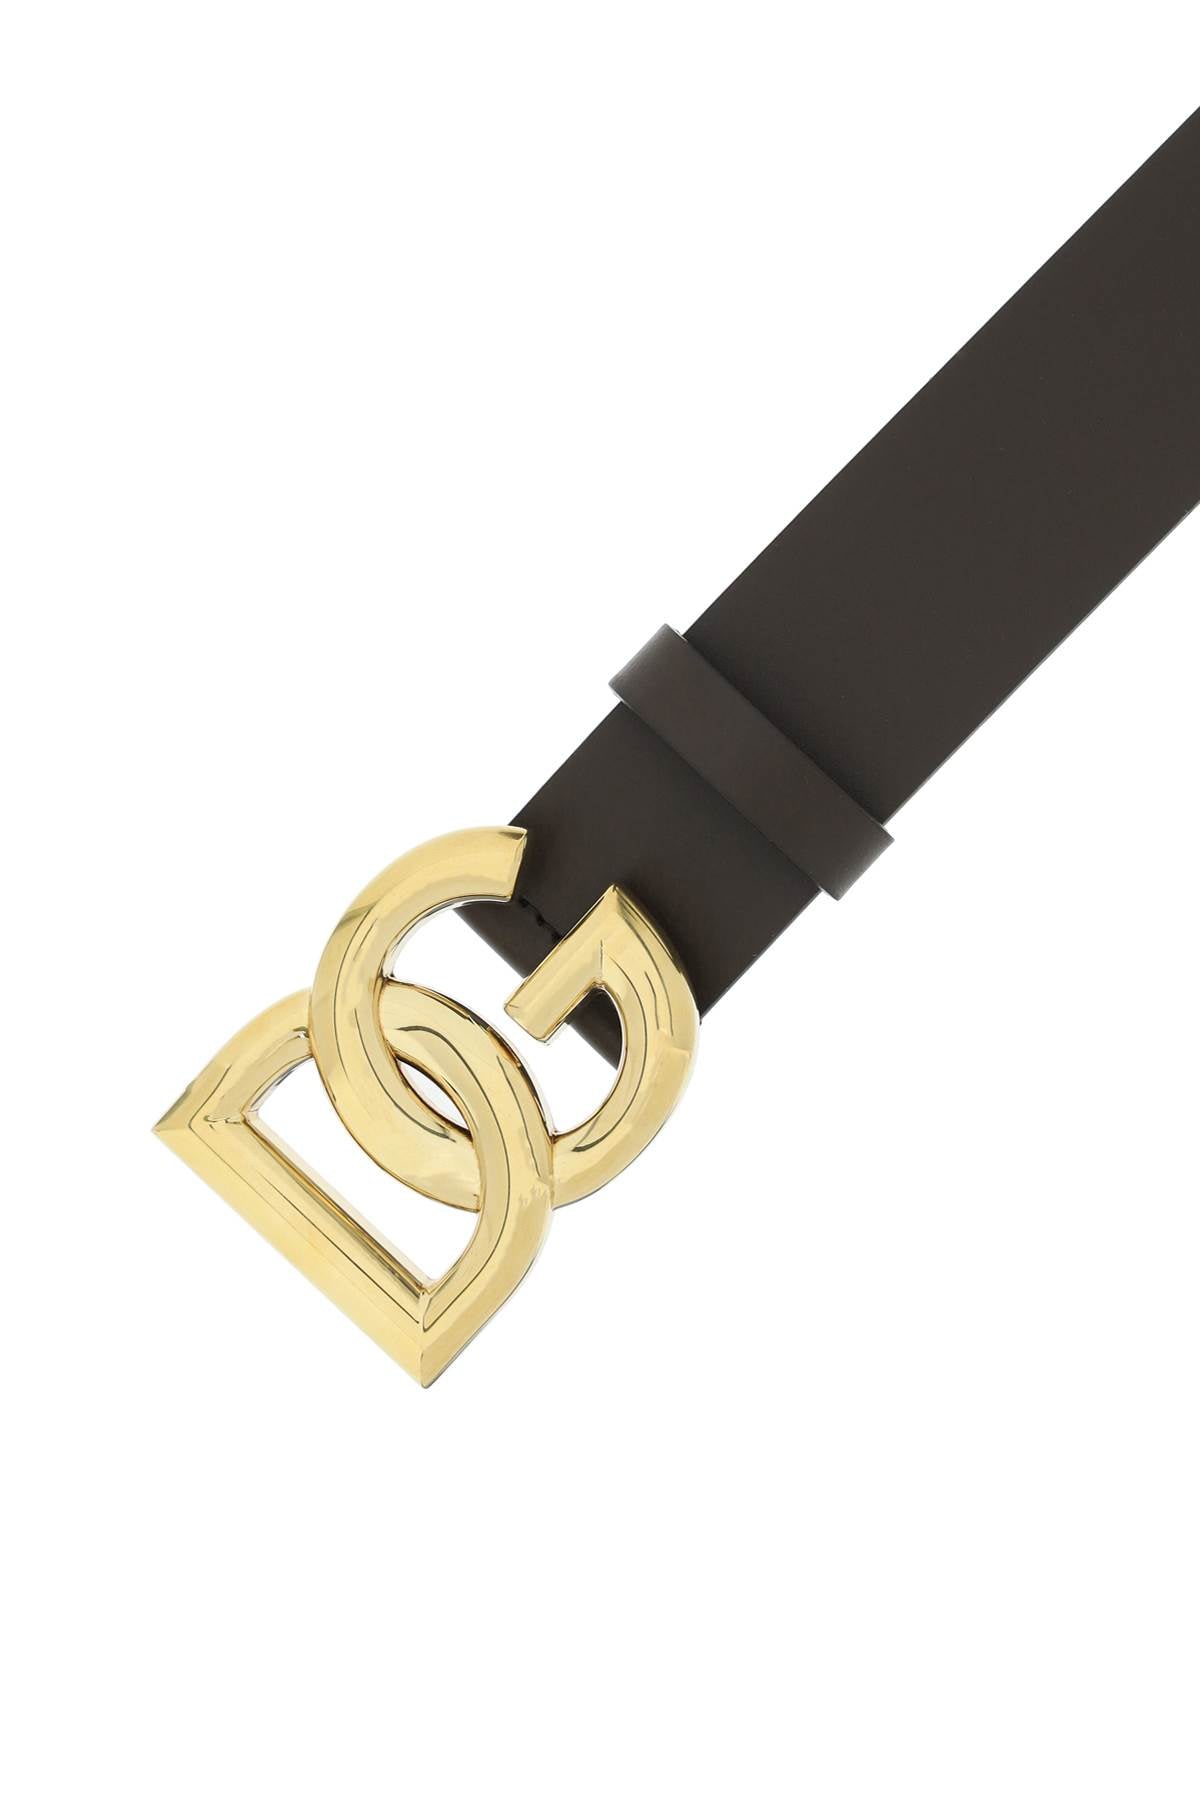 Dolce & gabbana lux leather belt with dg buckle-2